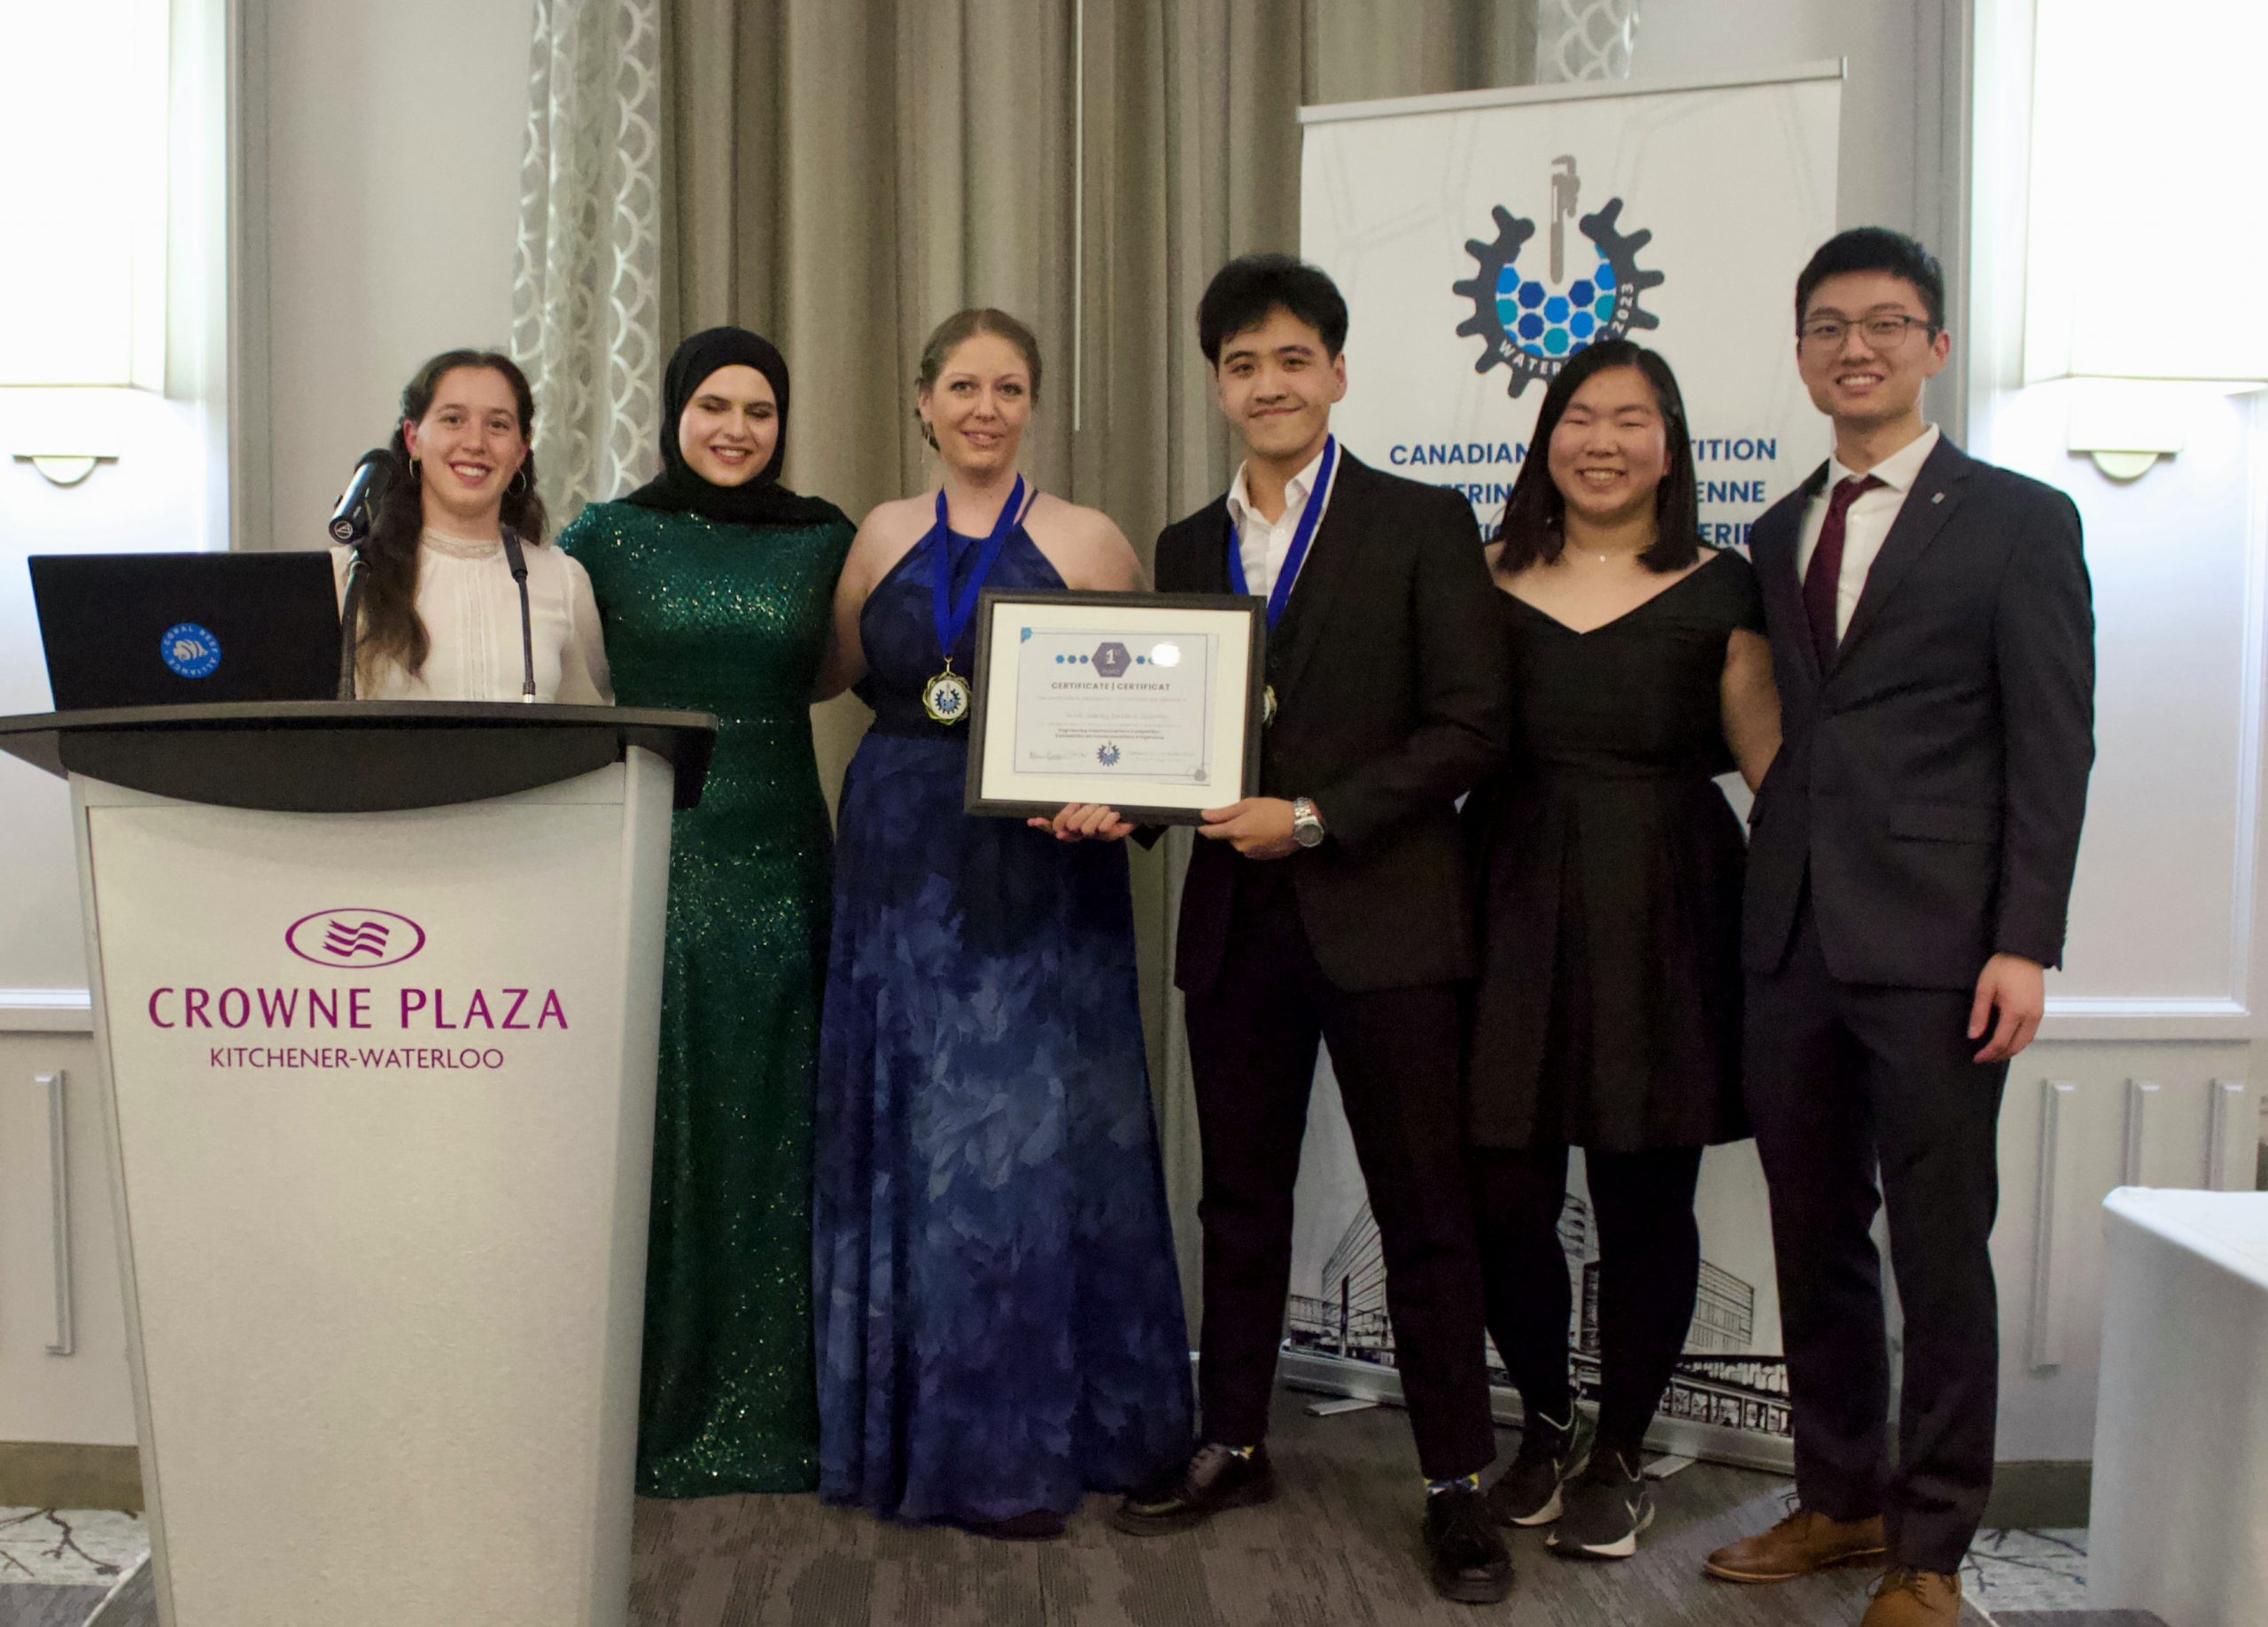 BCIT Electrical Engineering students Laurel Kinahan and Ramon Vicencio placed first place in the Communications category at the Canadian Engineering Competition 2023.